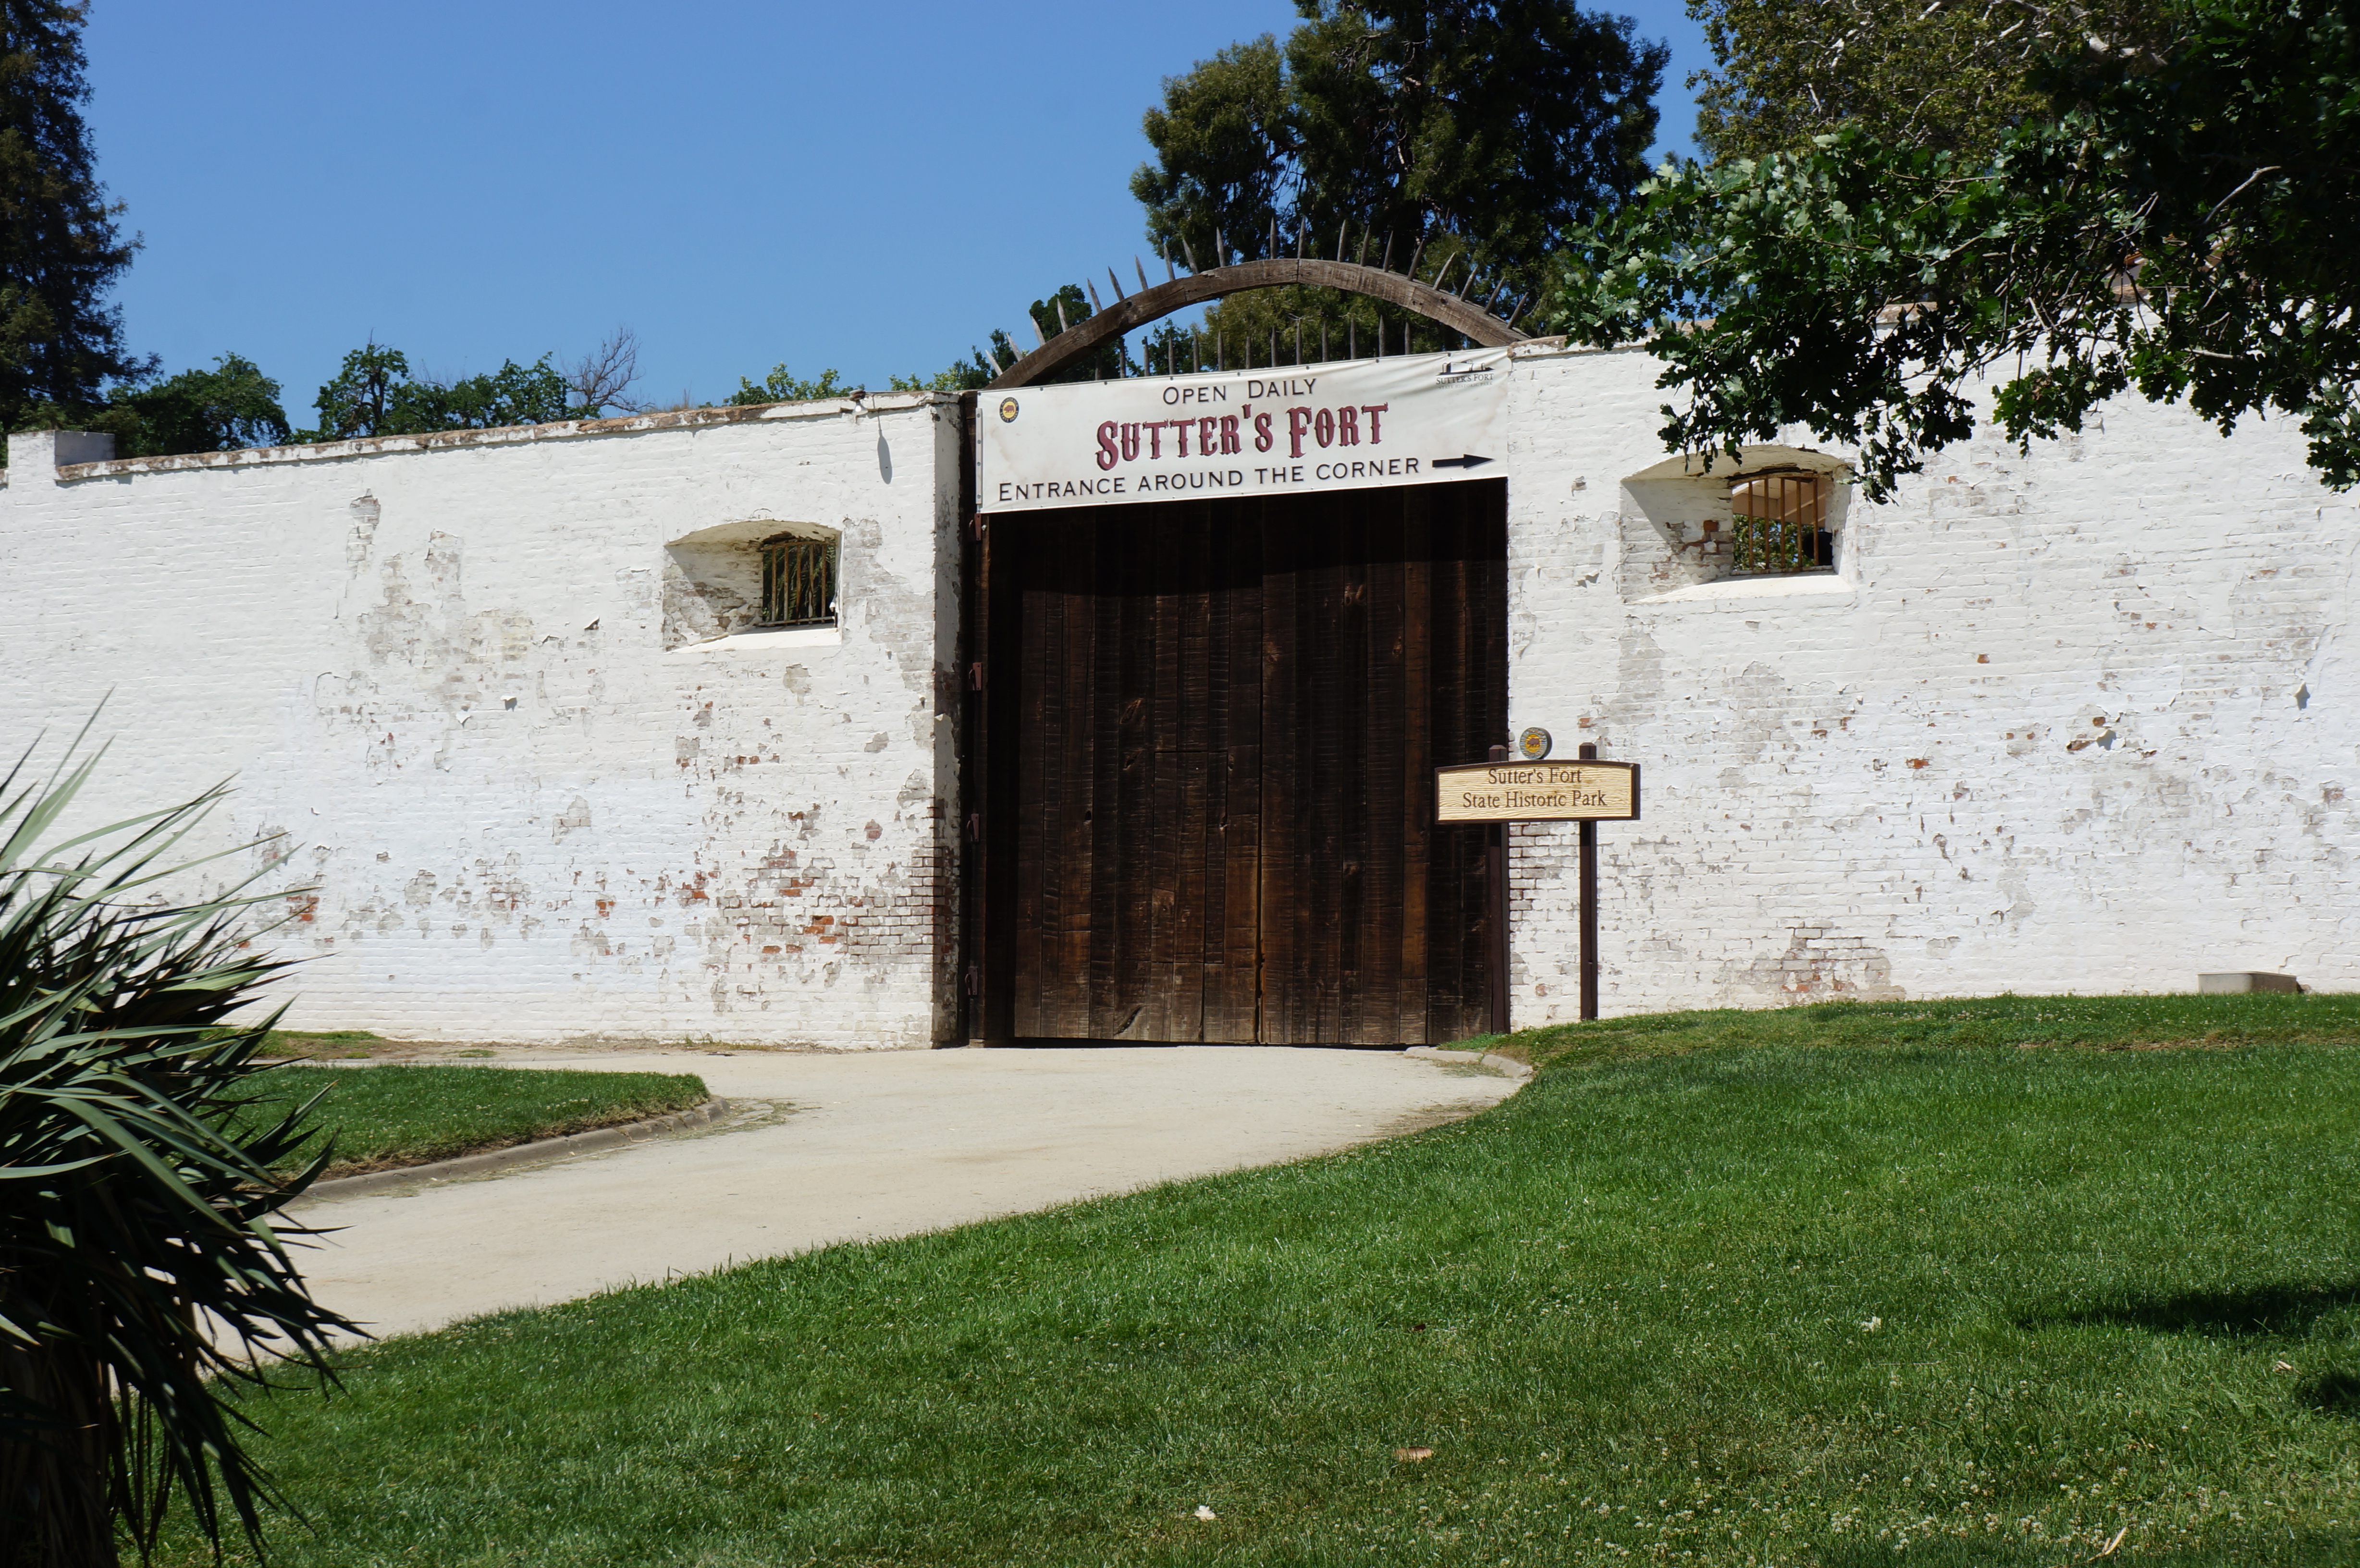 Photo of Sutter’s Fort to undergo massive renovations, Will be closed for a month